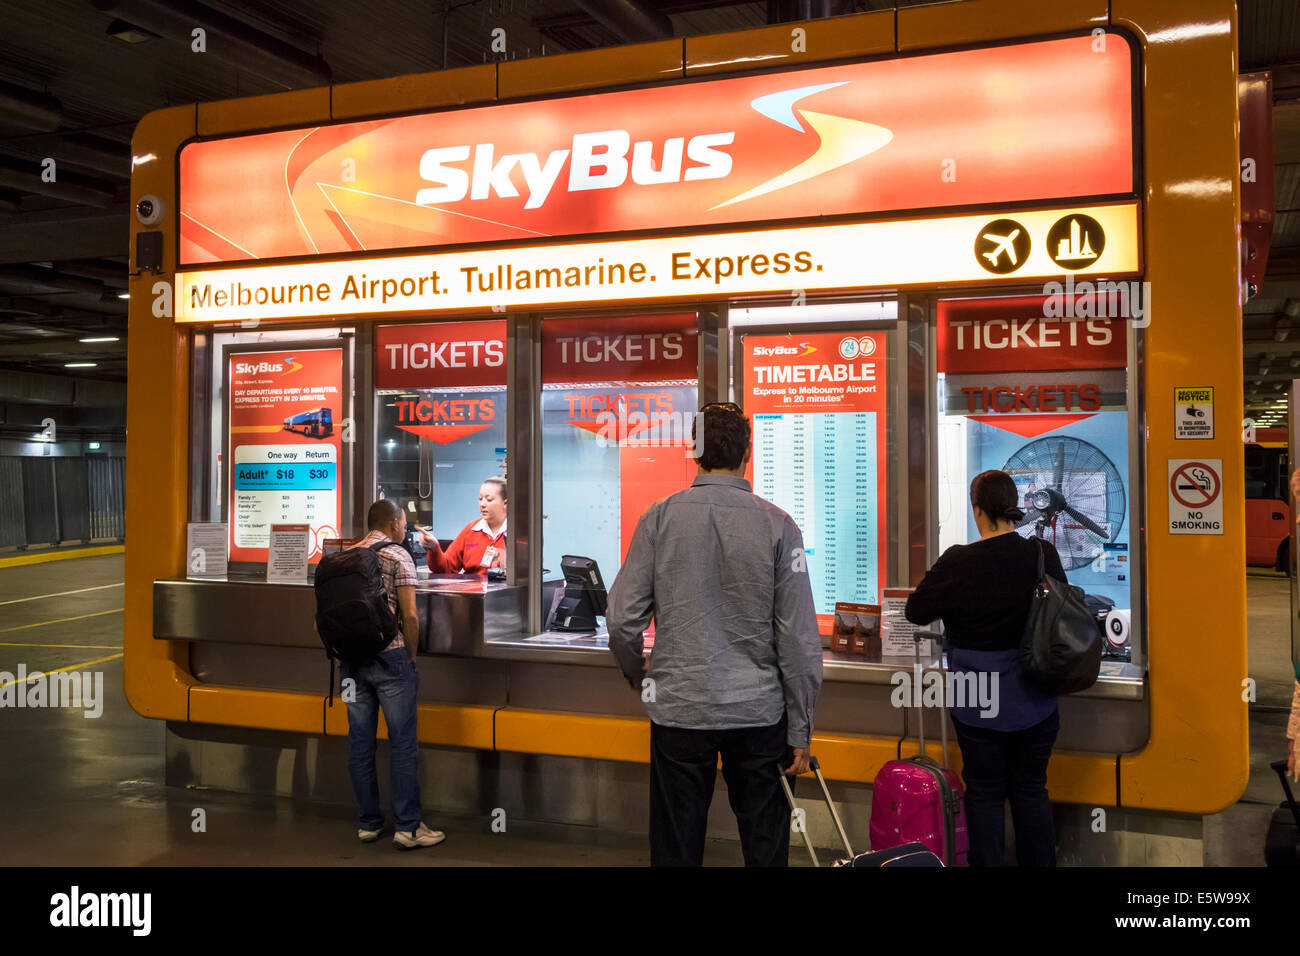 Melbourne Australia,Southern Cross Station,SkyBus,ticket window,booth,customers,transaction paying pays buying buys,airport bus,coach,AU140323004 Stock Photo